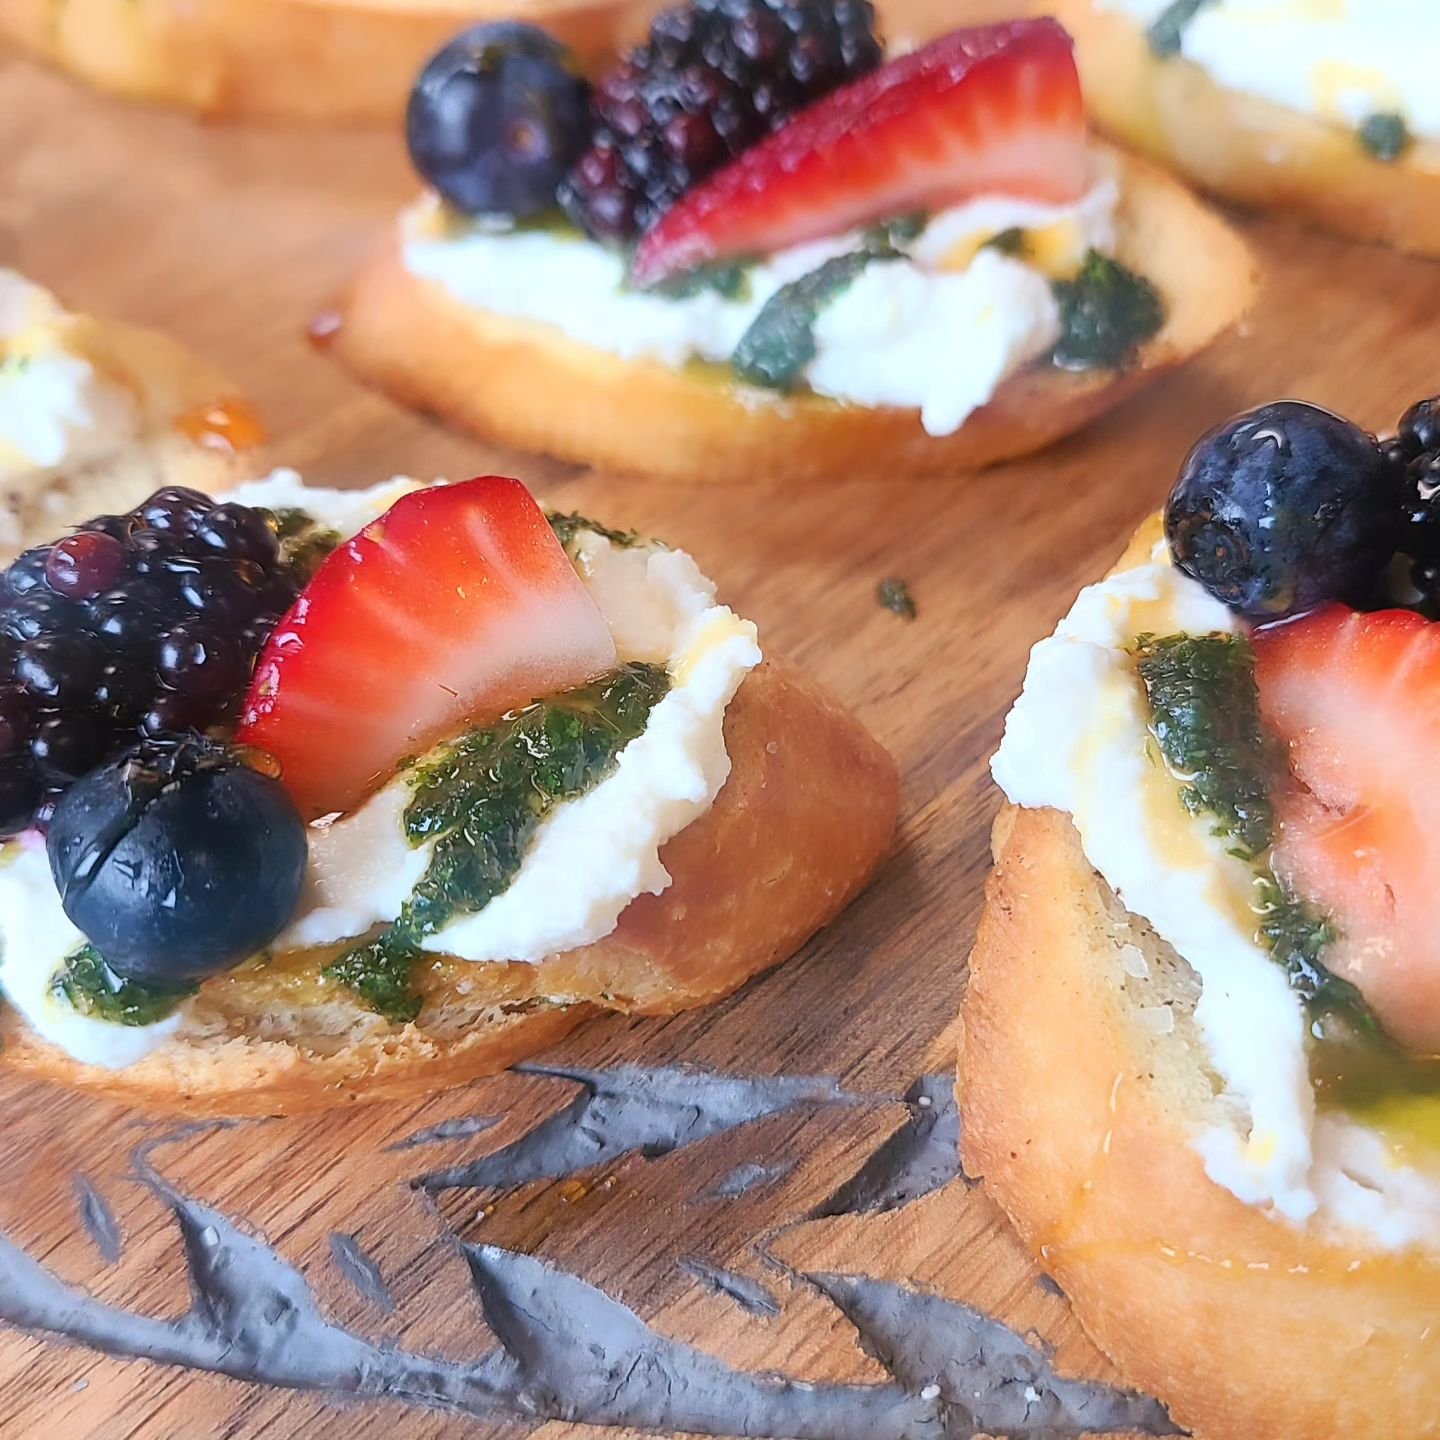 I've been called Queen of Crostini, and I'm okay with that 😅. It's one of my favorite appetizers to make because they're a blank canvas for creativity.  This one, with whipped ricotta, herb-infused olive oil, fresh berries, and local honey,  is SO G